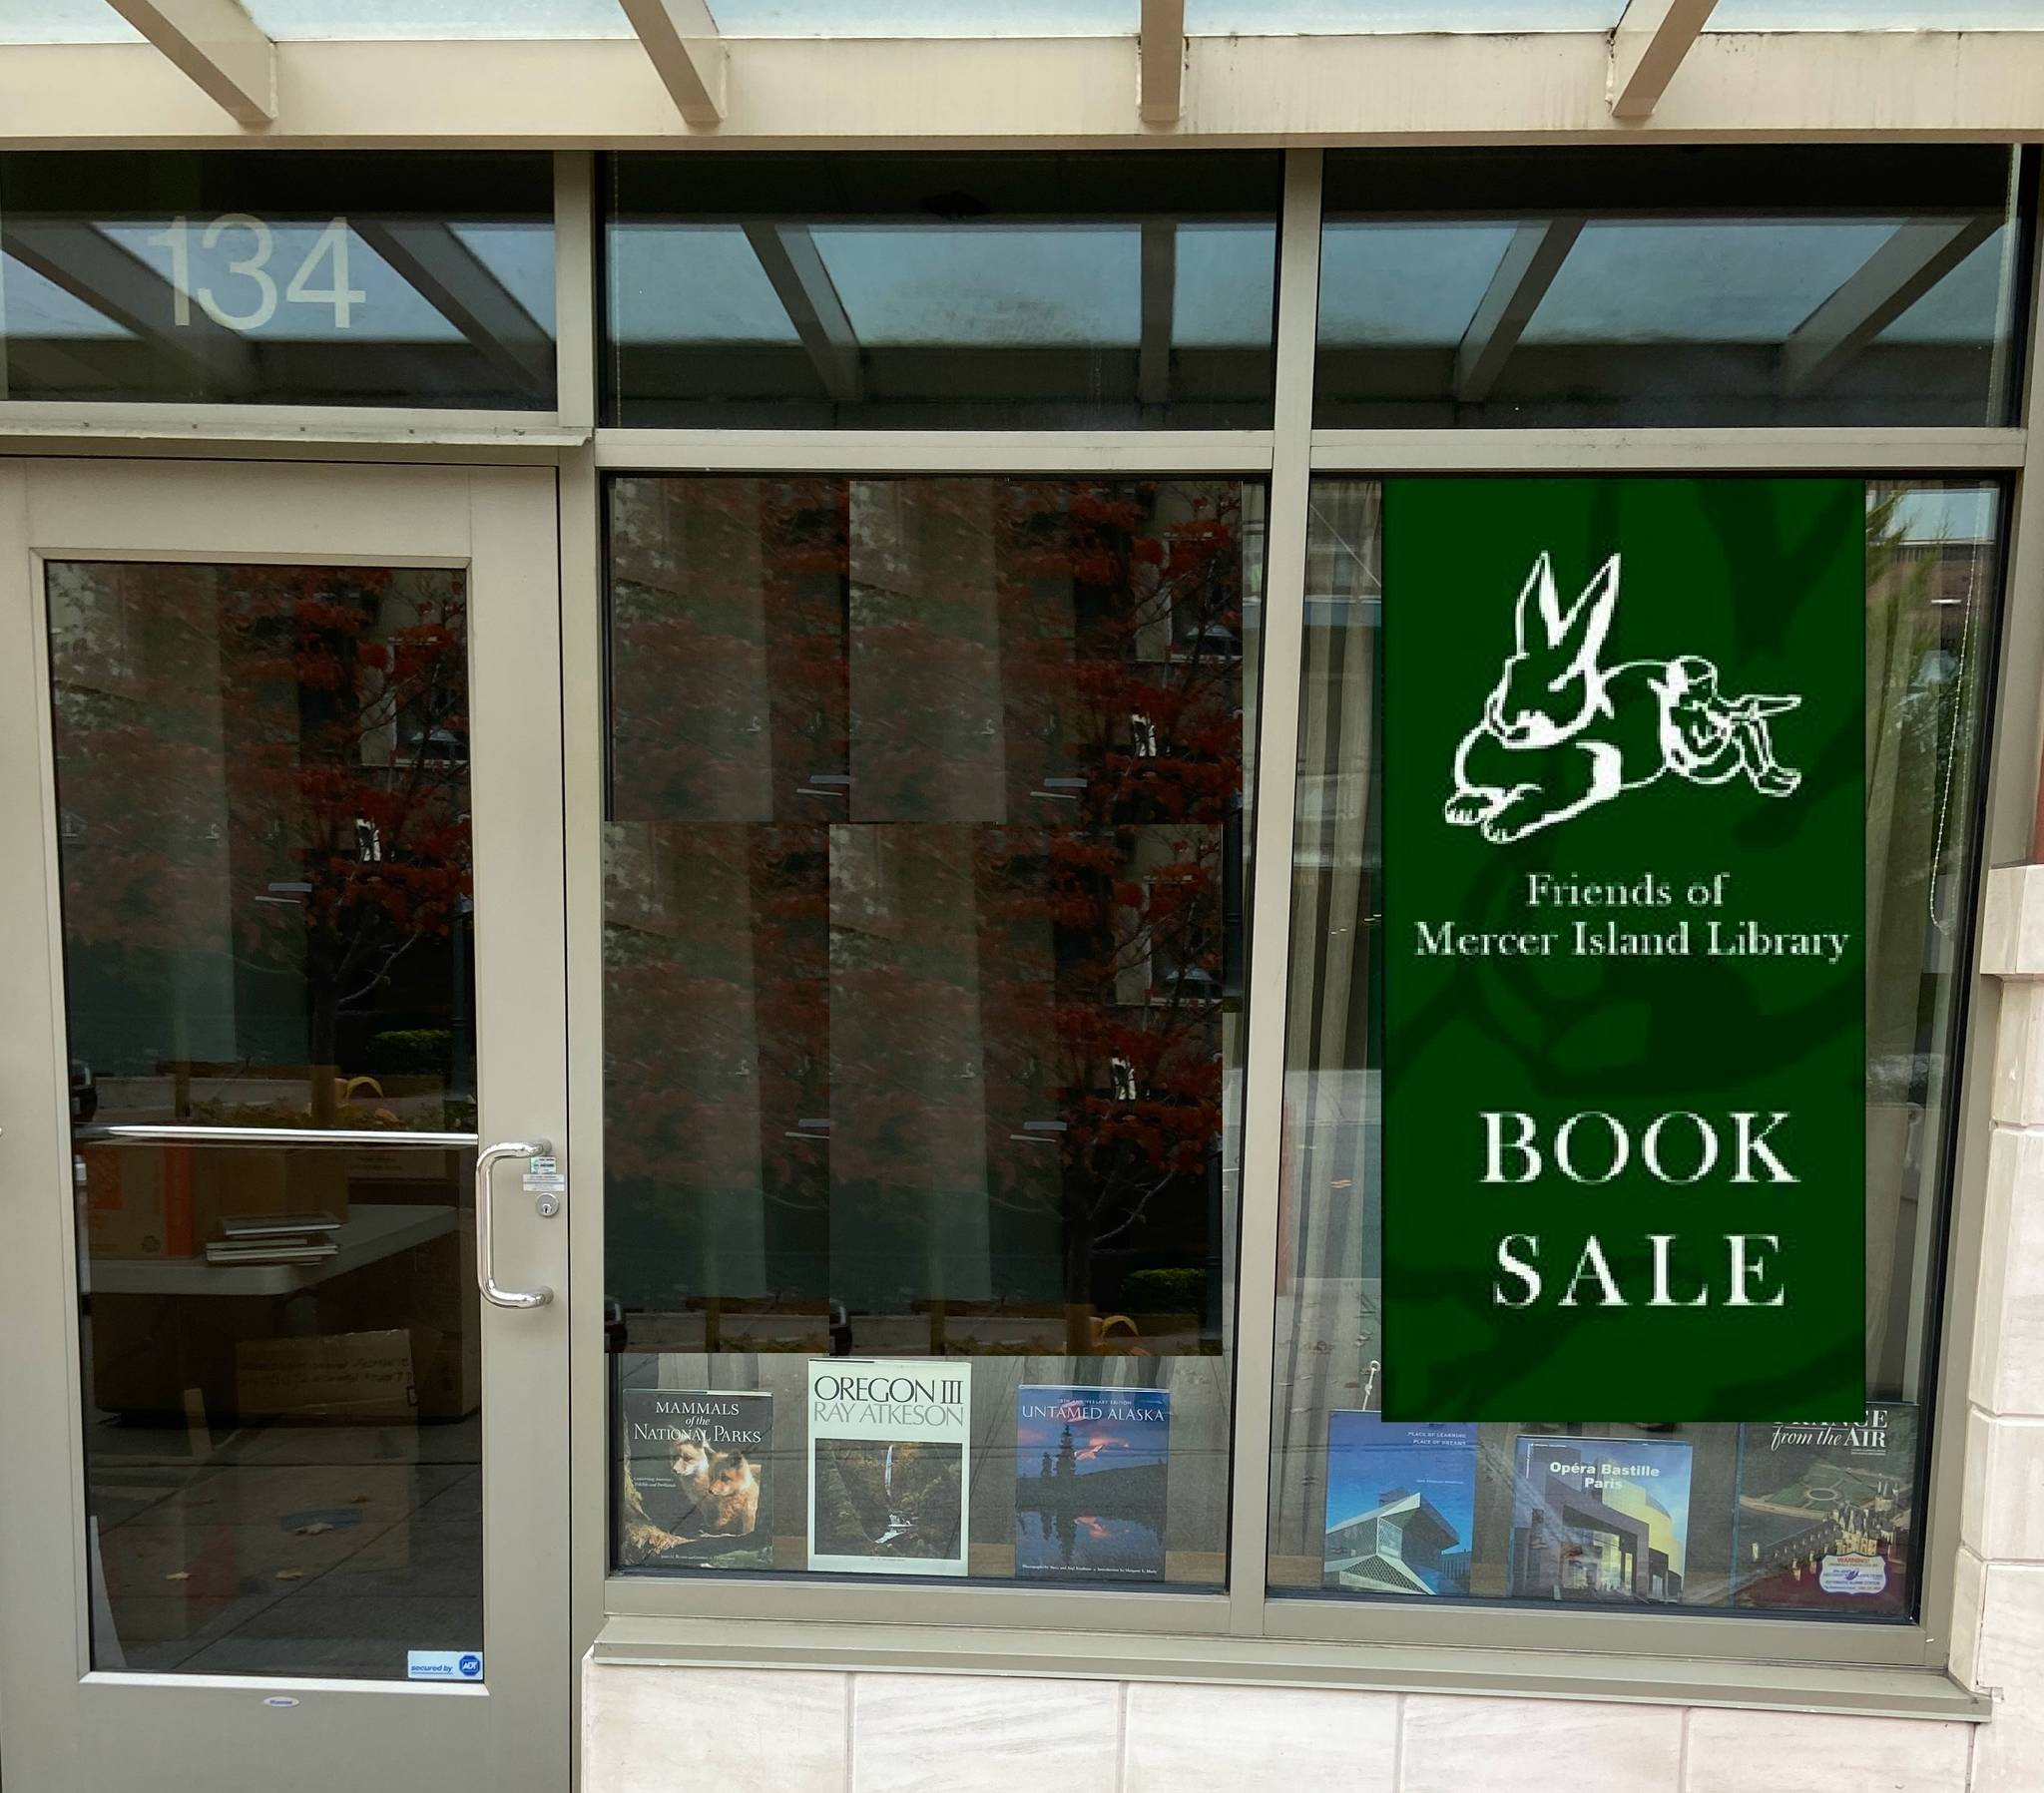 Friends of the Mercer Island Library reopened its pop-up used-book sale on Nov. 13. Thanks to the generosity of Mercer Apartments, the sale — which supports programs at the Mercer Island Library — is now held at the previous 5 Elements Pilates location at 130-134 77th Ave. SE from 10 a.m. to 2 p.m. Fridays and noon to 5 p.m. Saturdays. “Please drop by to pick up quality books to read or gift or drop off any books you may have cleaned out during the pandemic and wish to donate. We will ensure that they go to a good home. It is this spirit that makes Mercer Island such a great place to live, work, and raise our children. Thank you,” reads a press release. Courtesy photo